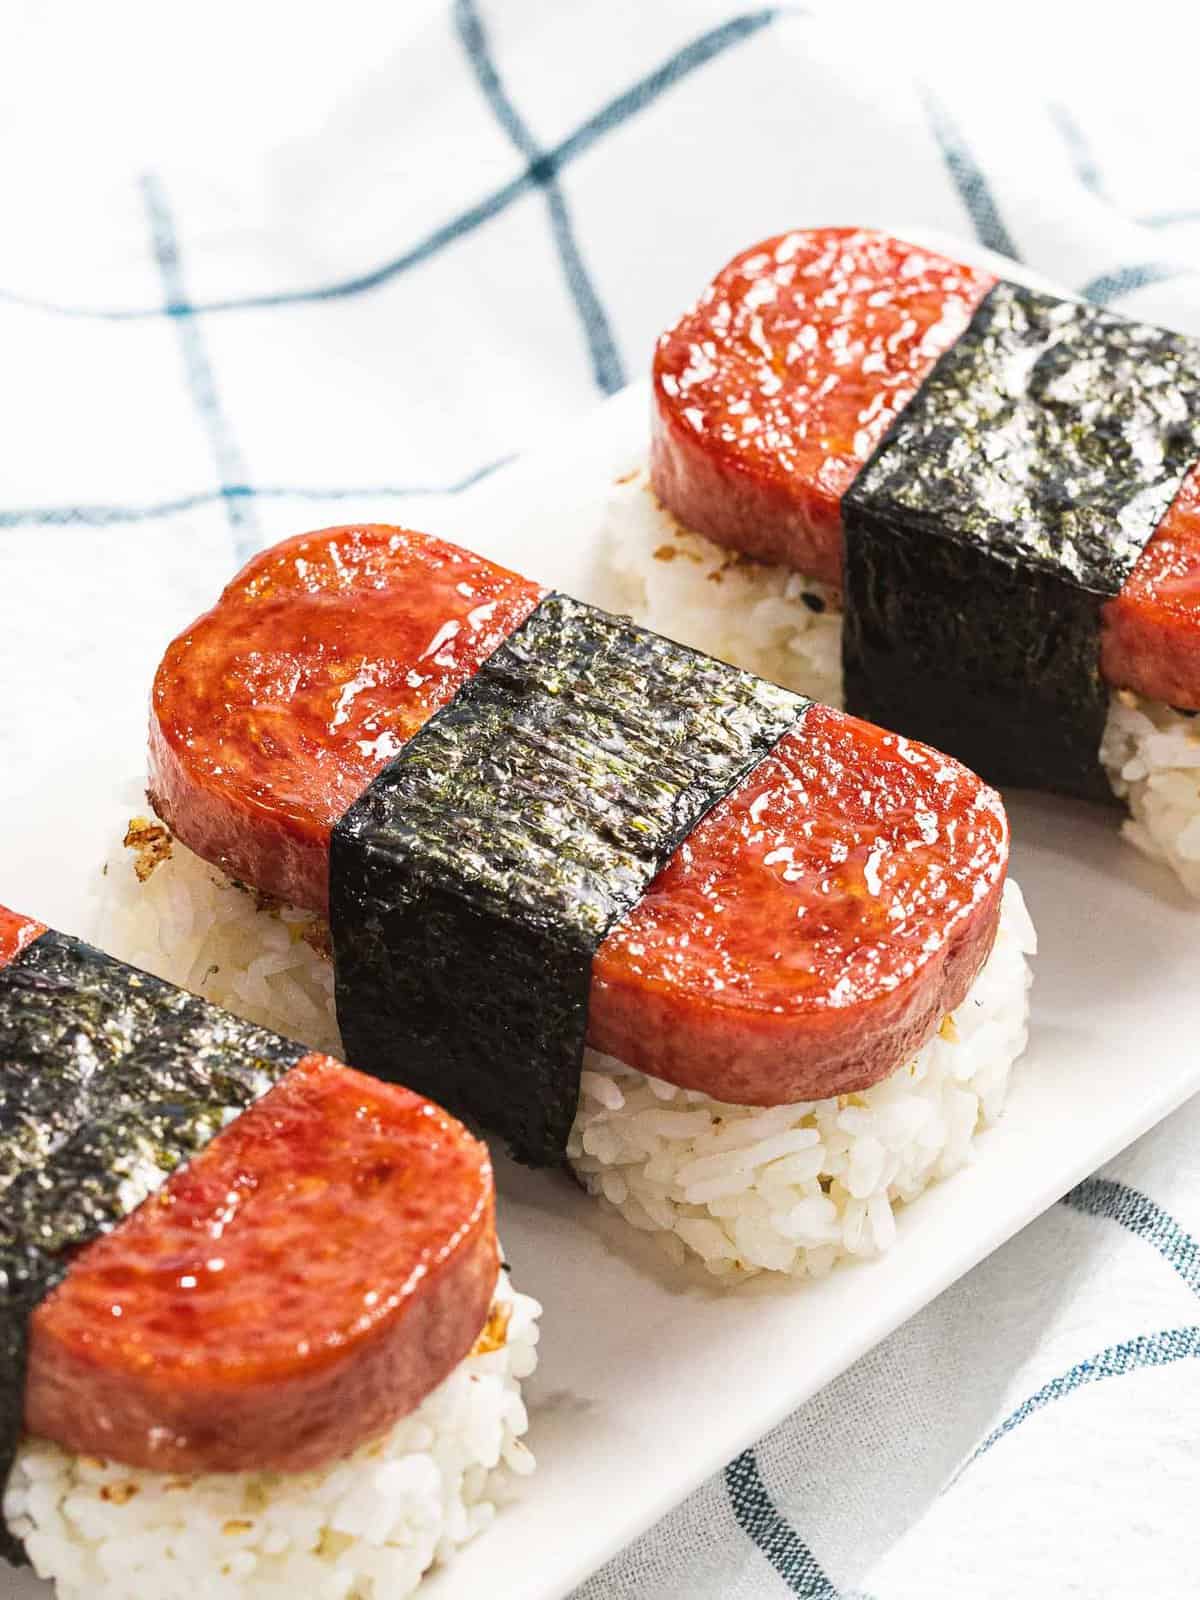 Spam musubi with rice, fried spam, and nori seaweed.